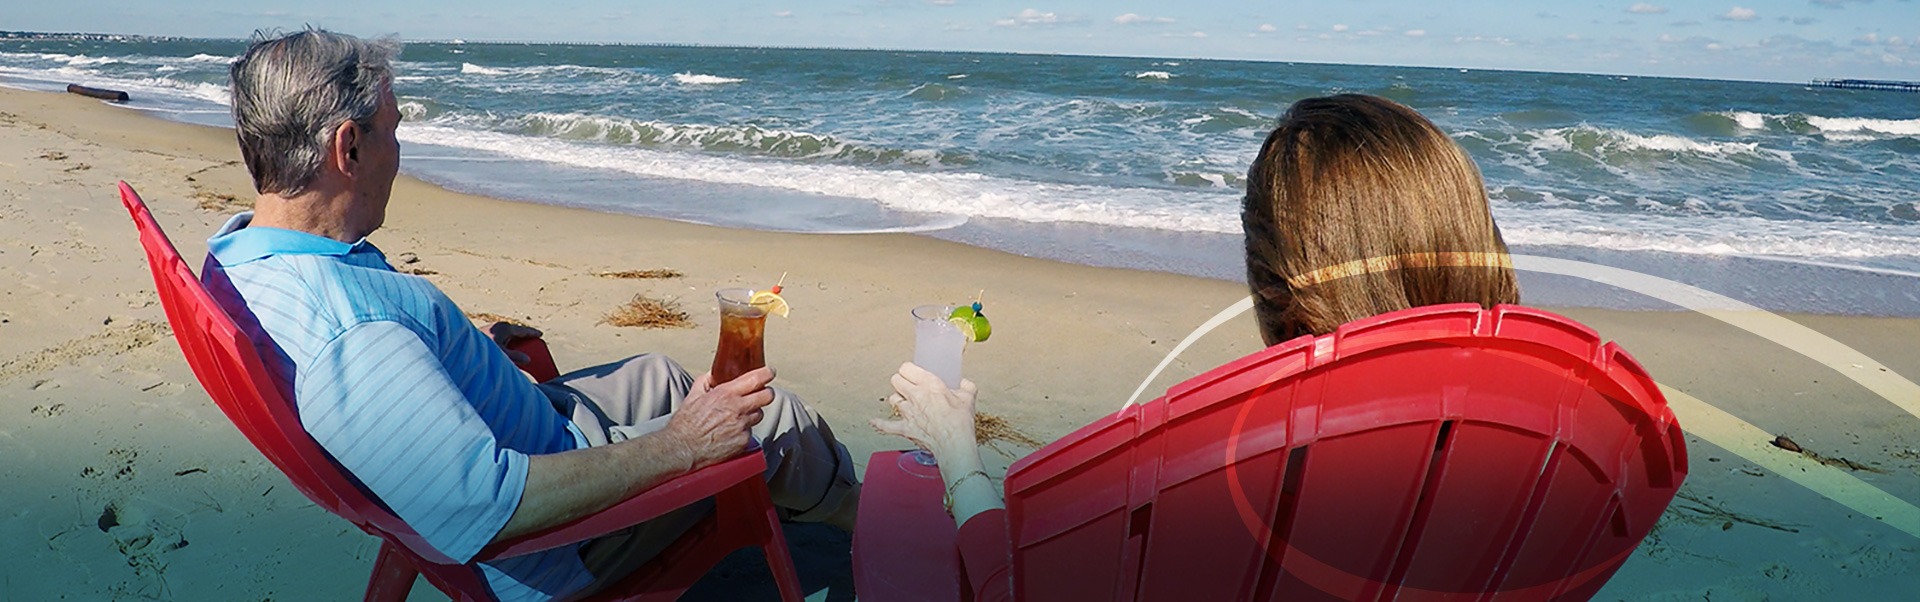 Retired Man and Woman Enjoying a Cocktail on the Sand